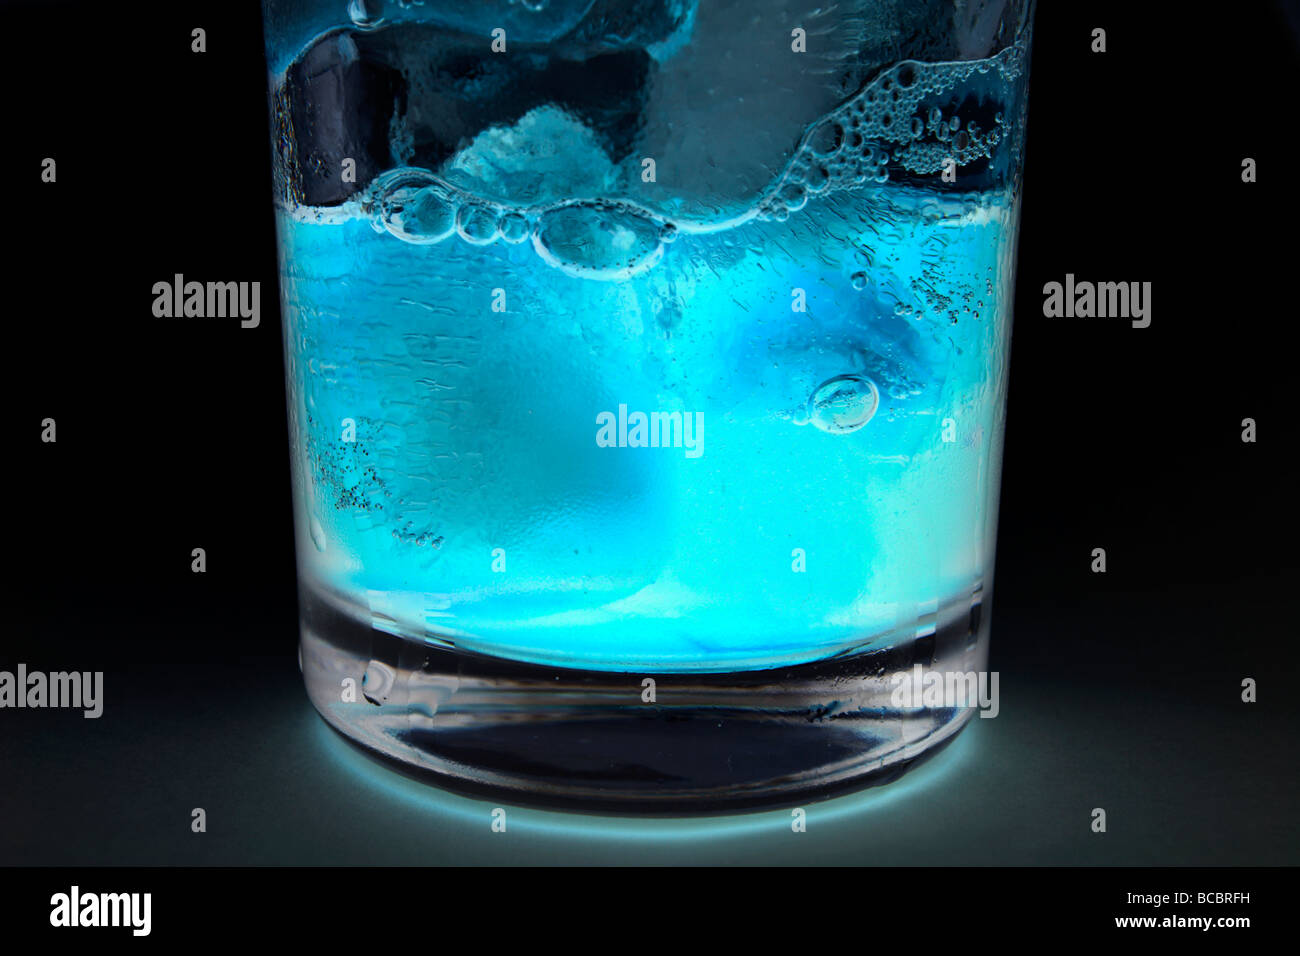 A glass containing blue coloured liquid and ice cubes Stock Photo